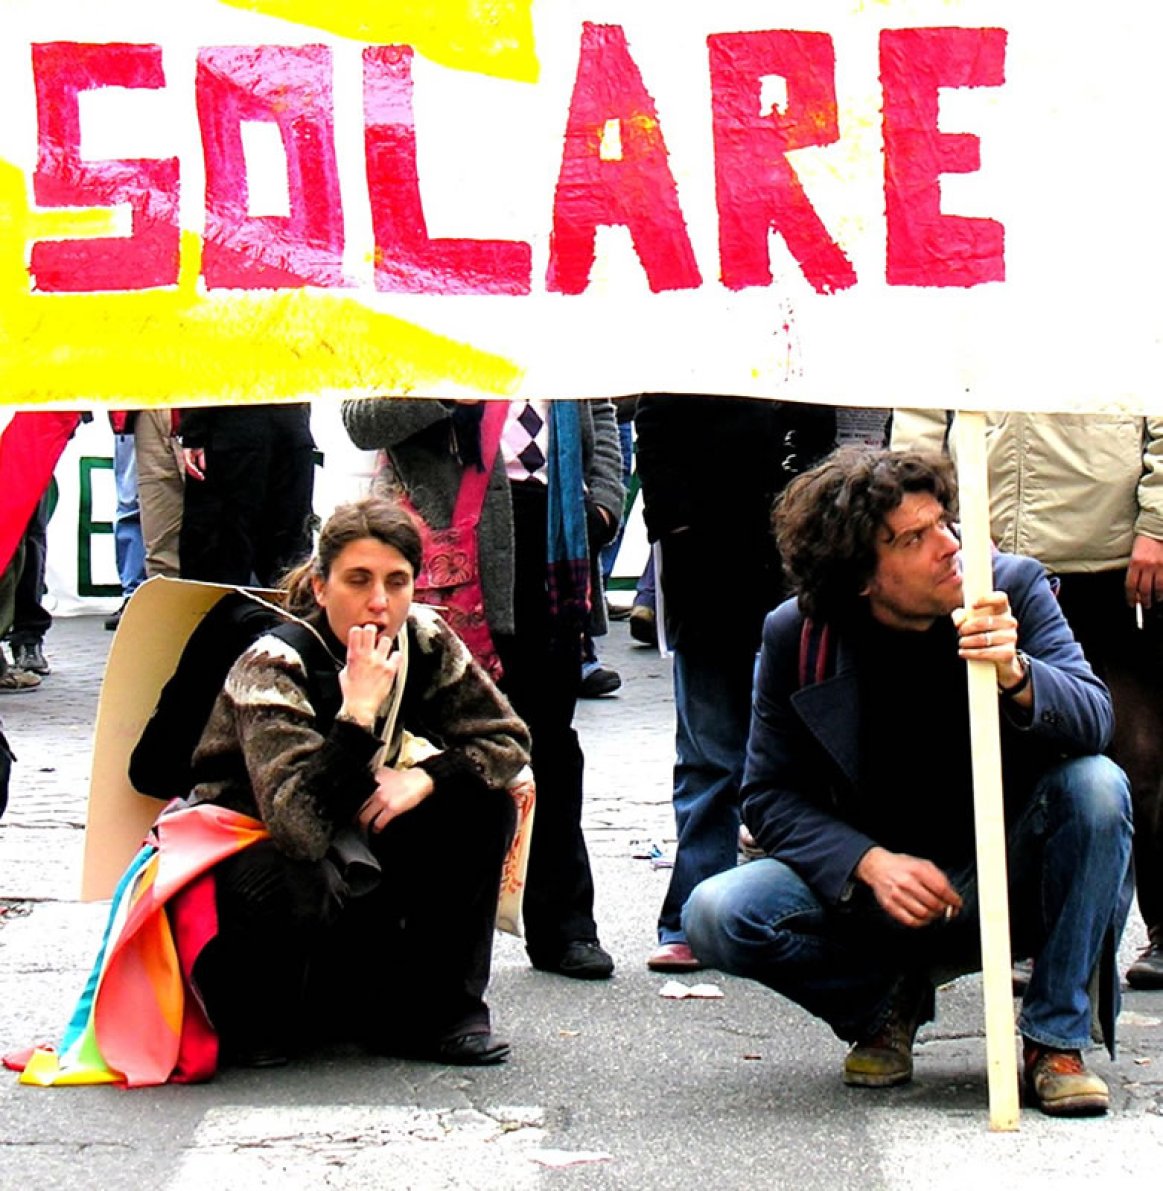 Solar activists By Hedrok on Flickr